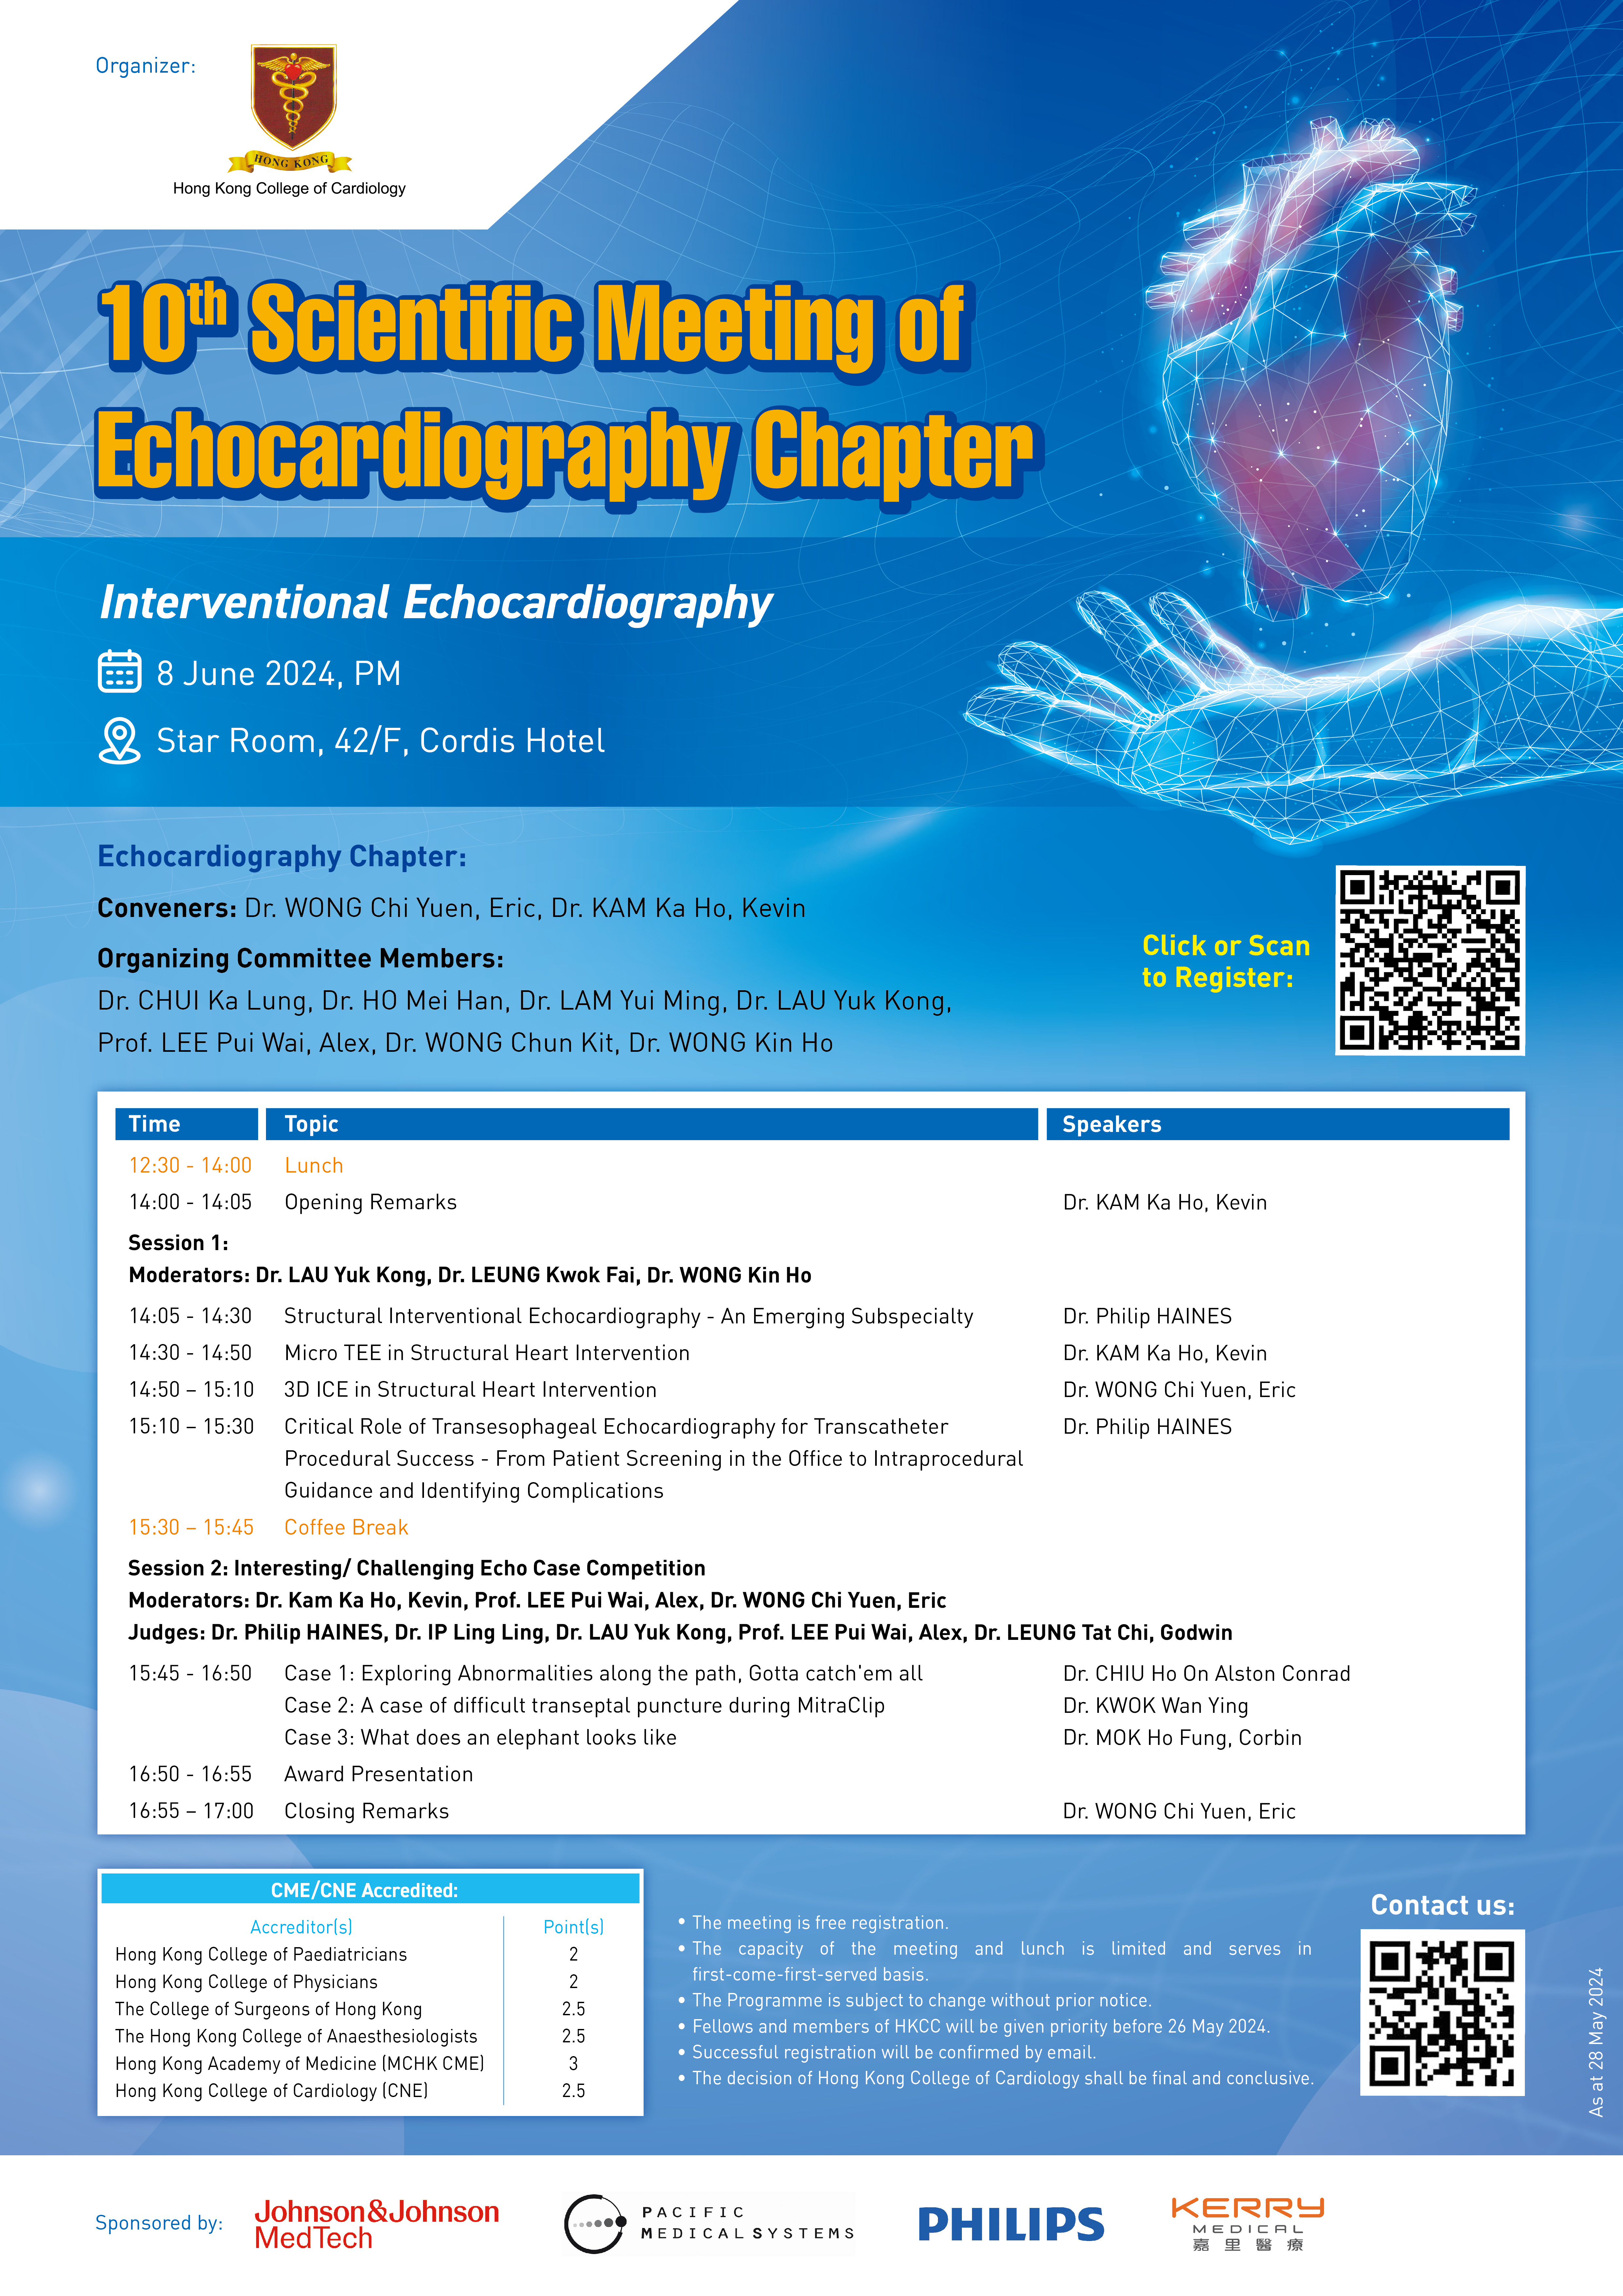 10th Scientific Meeting of Echocardiography Chapter